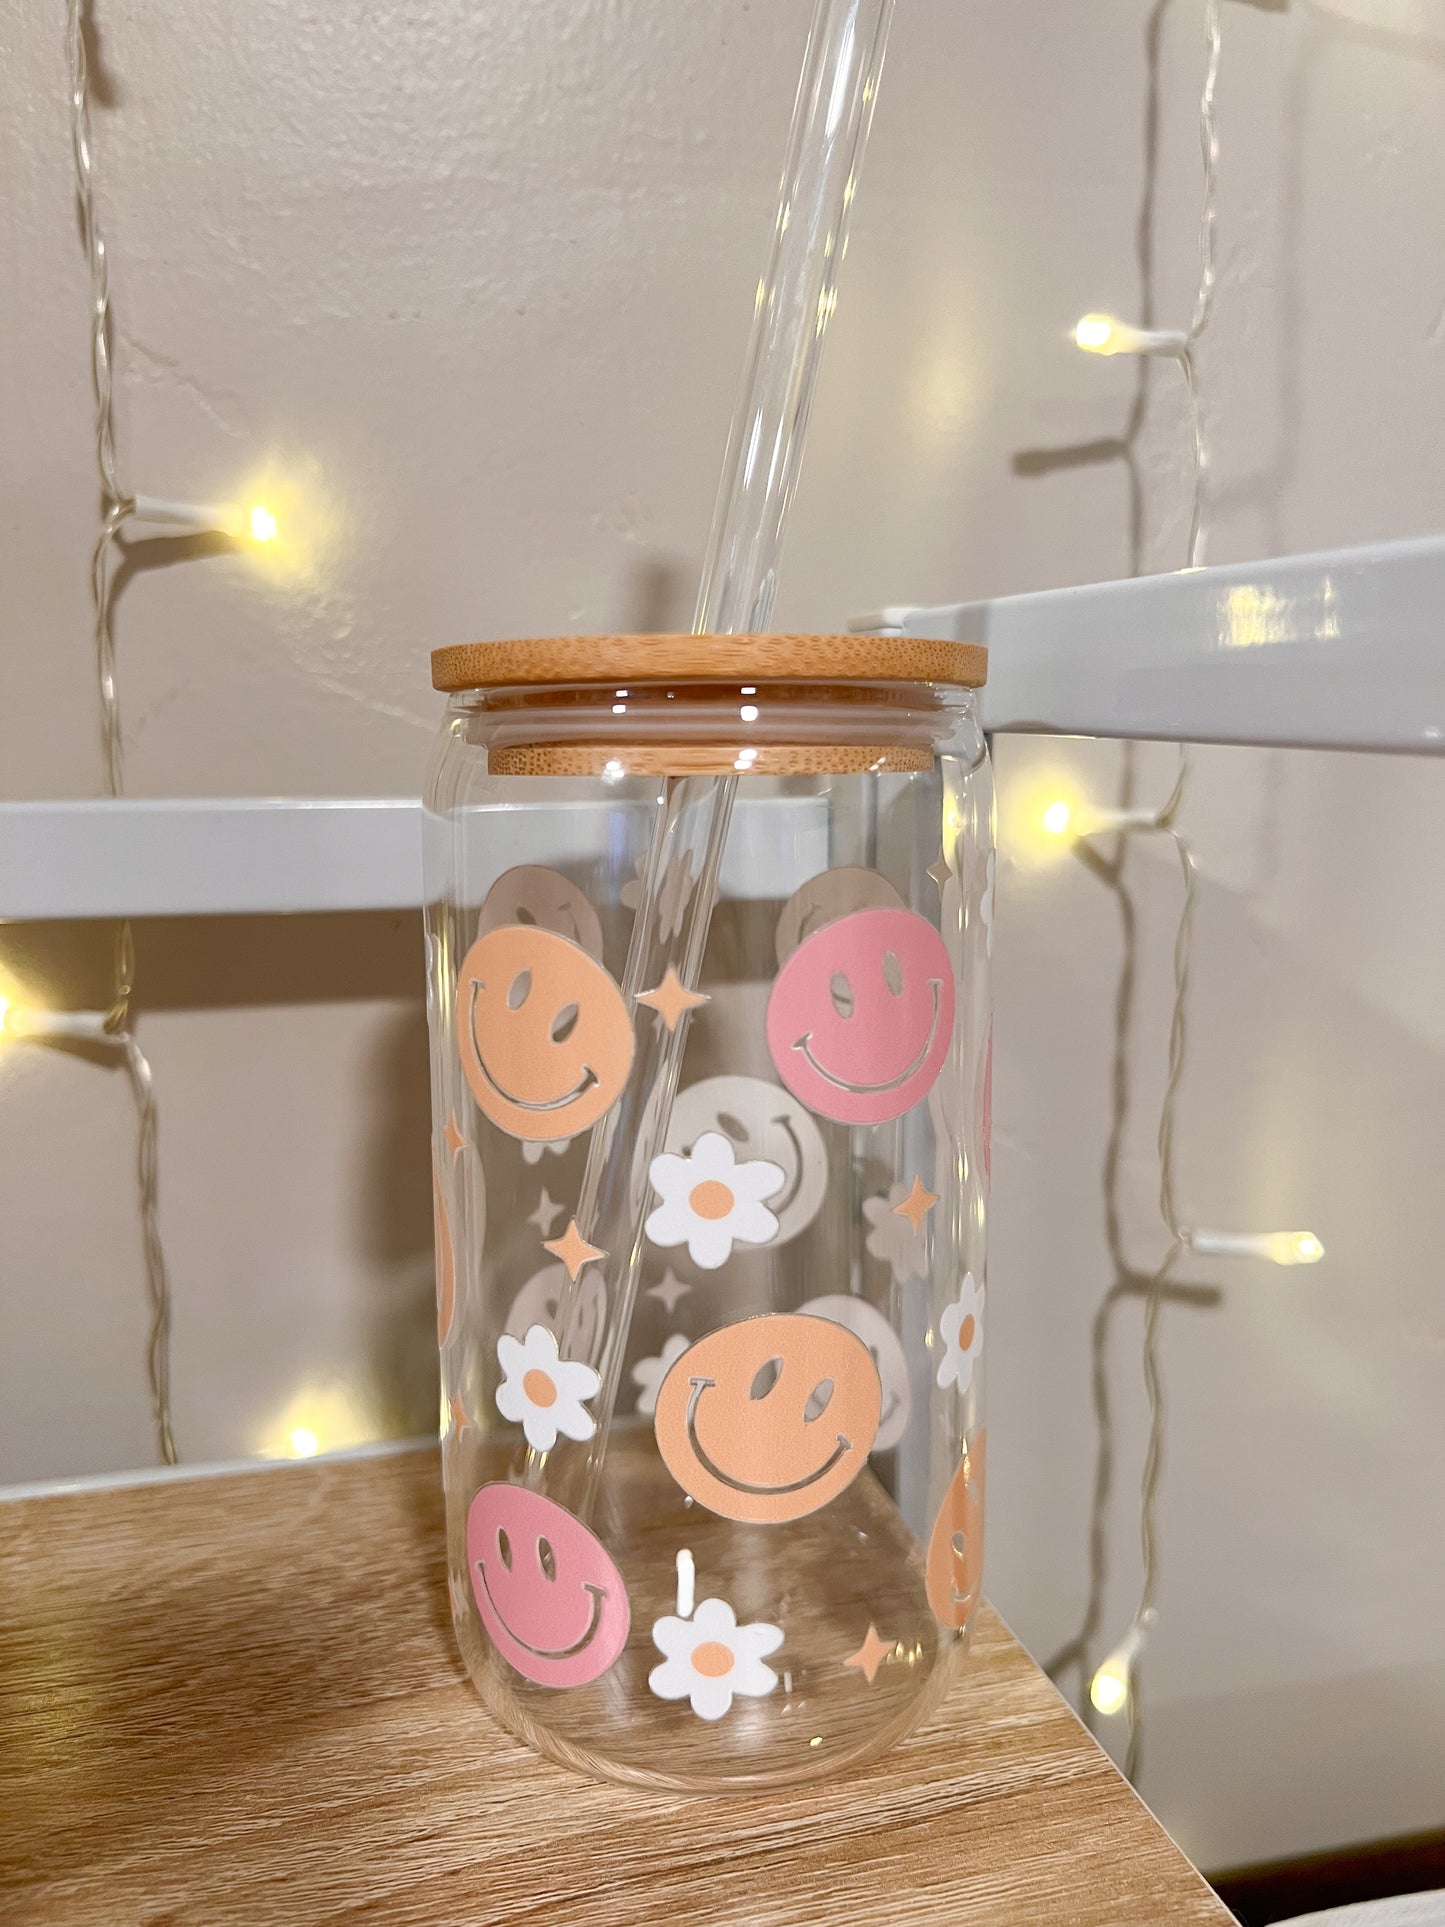 Smile vibes cup